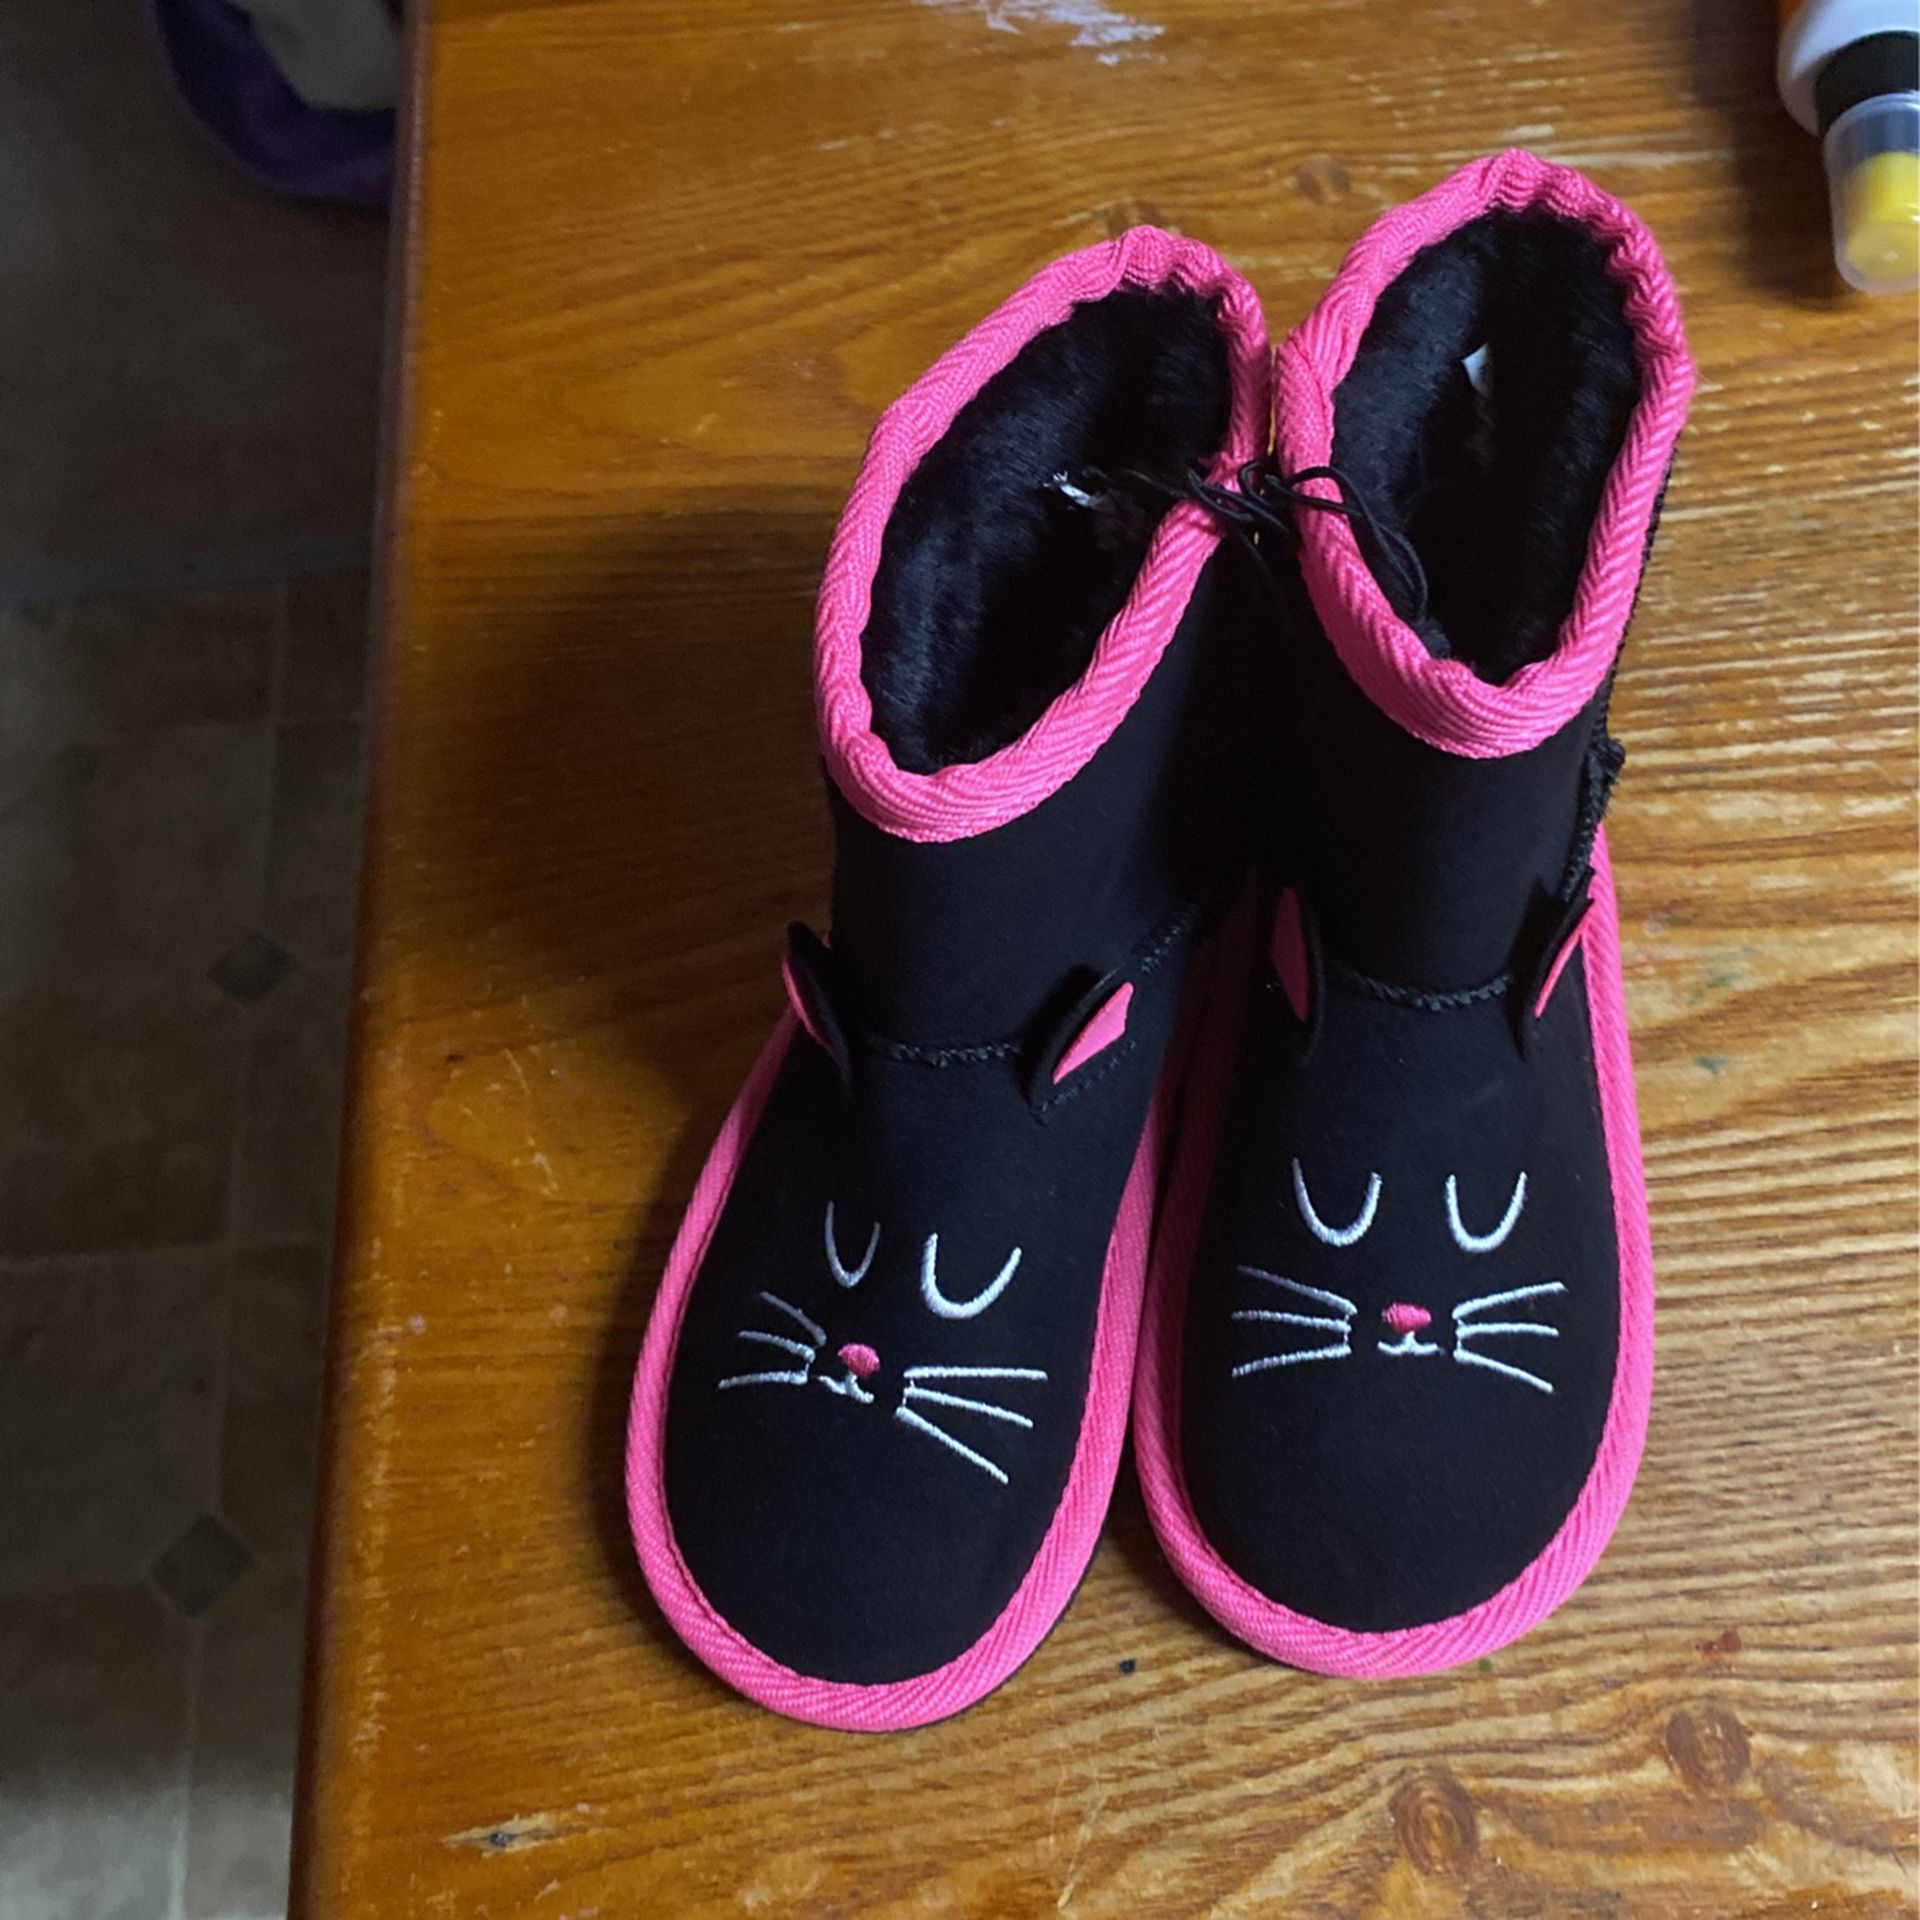 Hot Pink and black Kitty boots